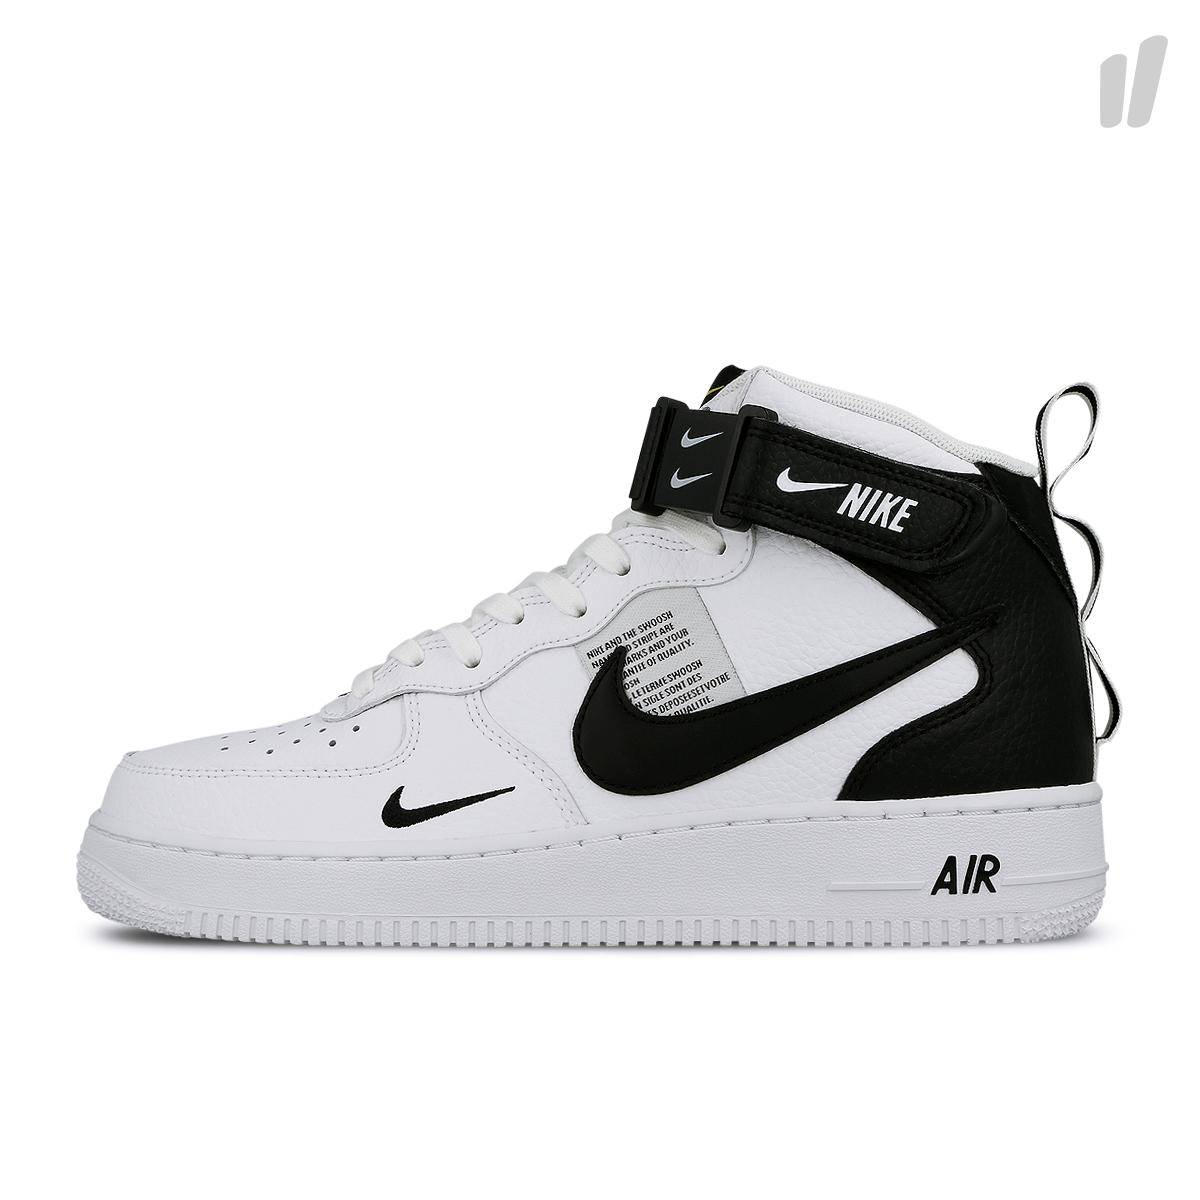 Nike Air Force 1 Mid `07 LV8 (804609 